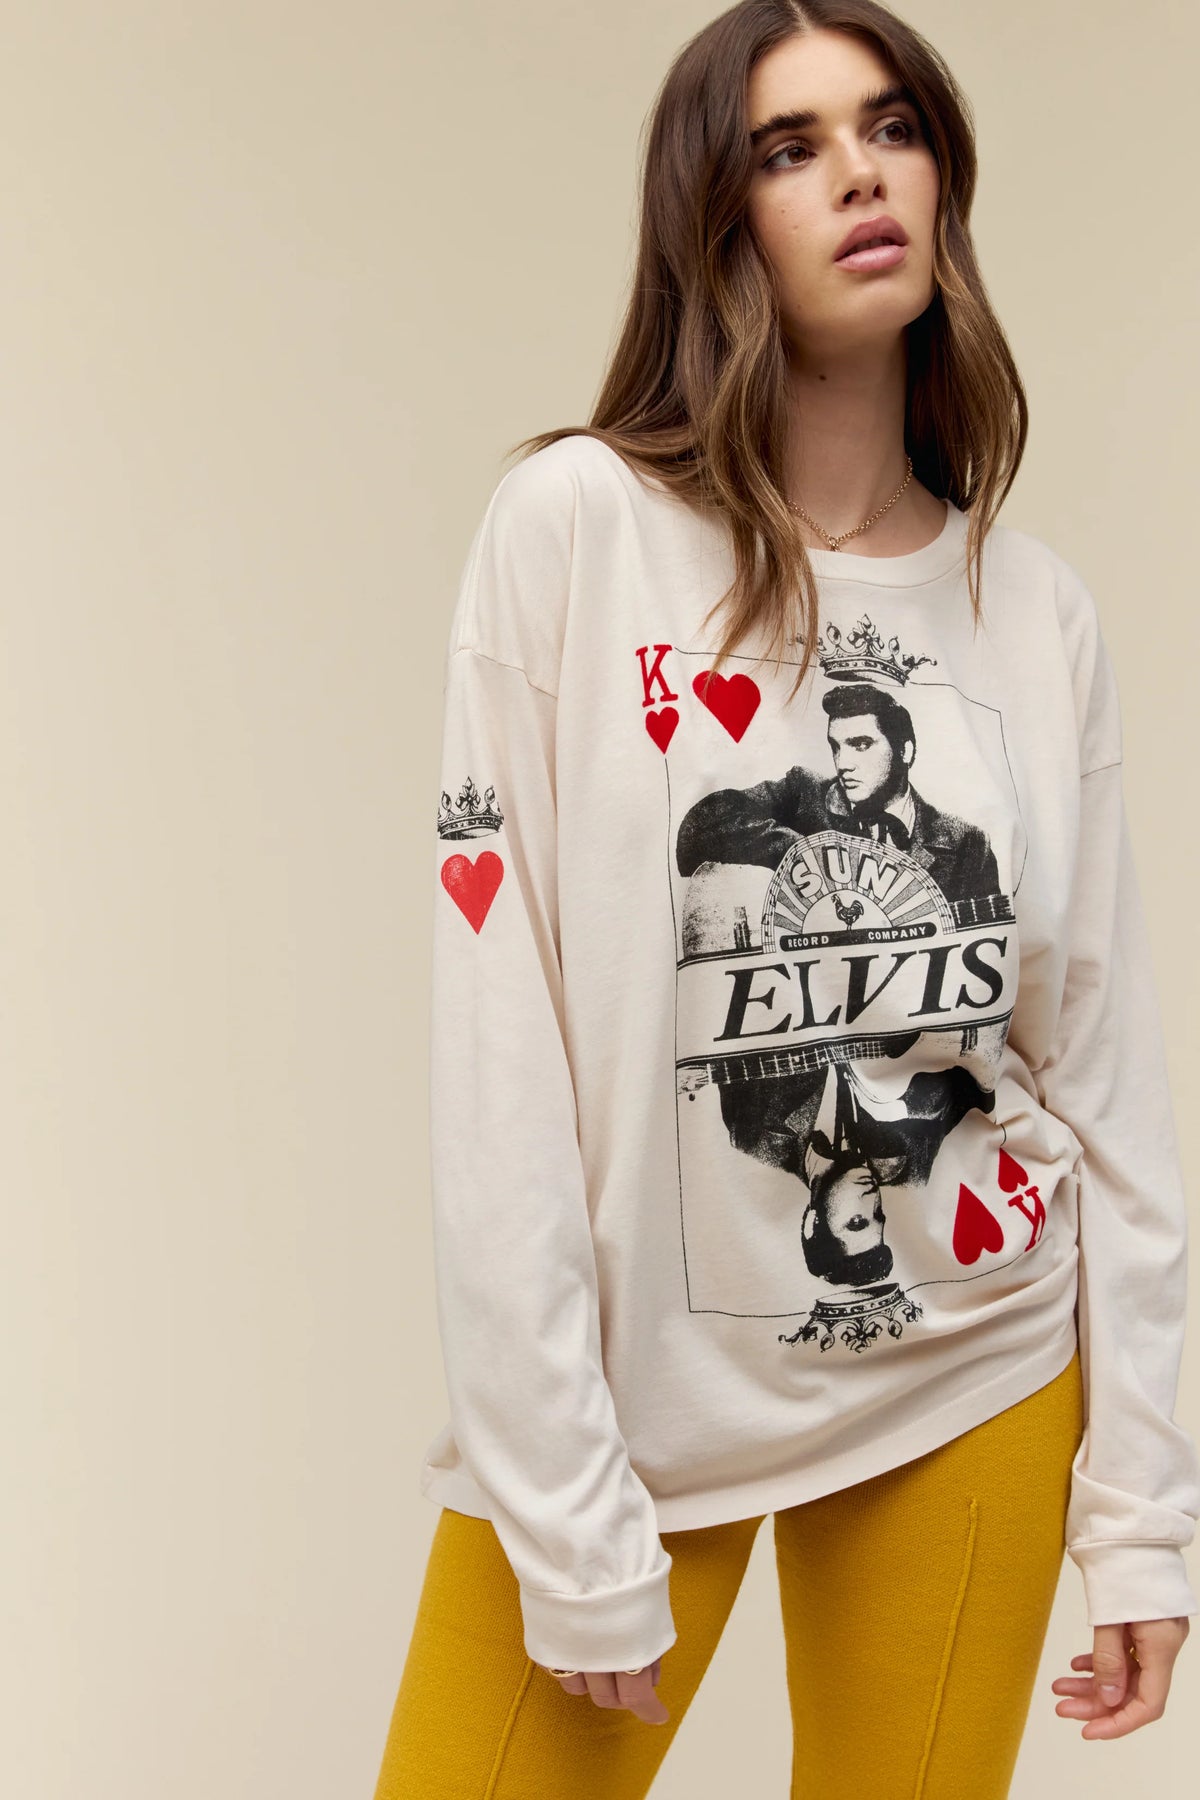 Daydreamer Sun Records X Elvis King Of Hearts L/S